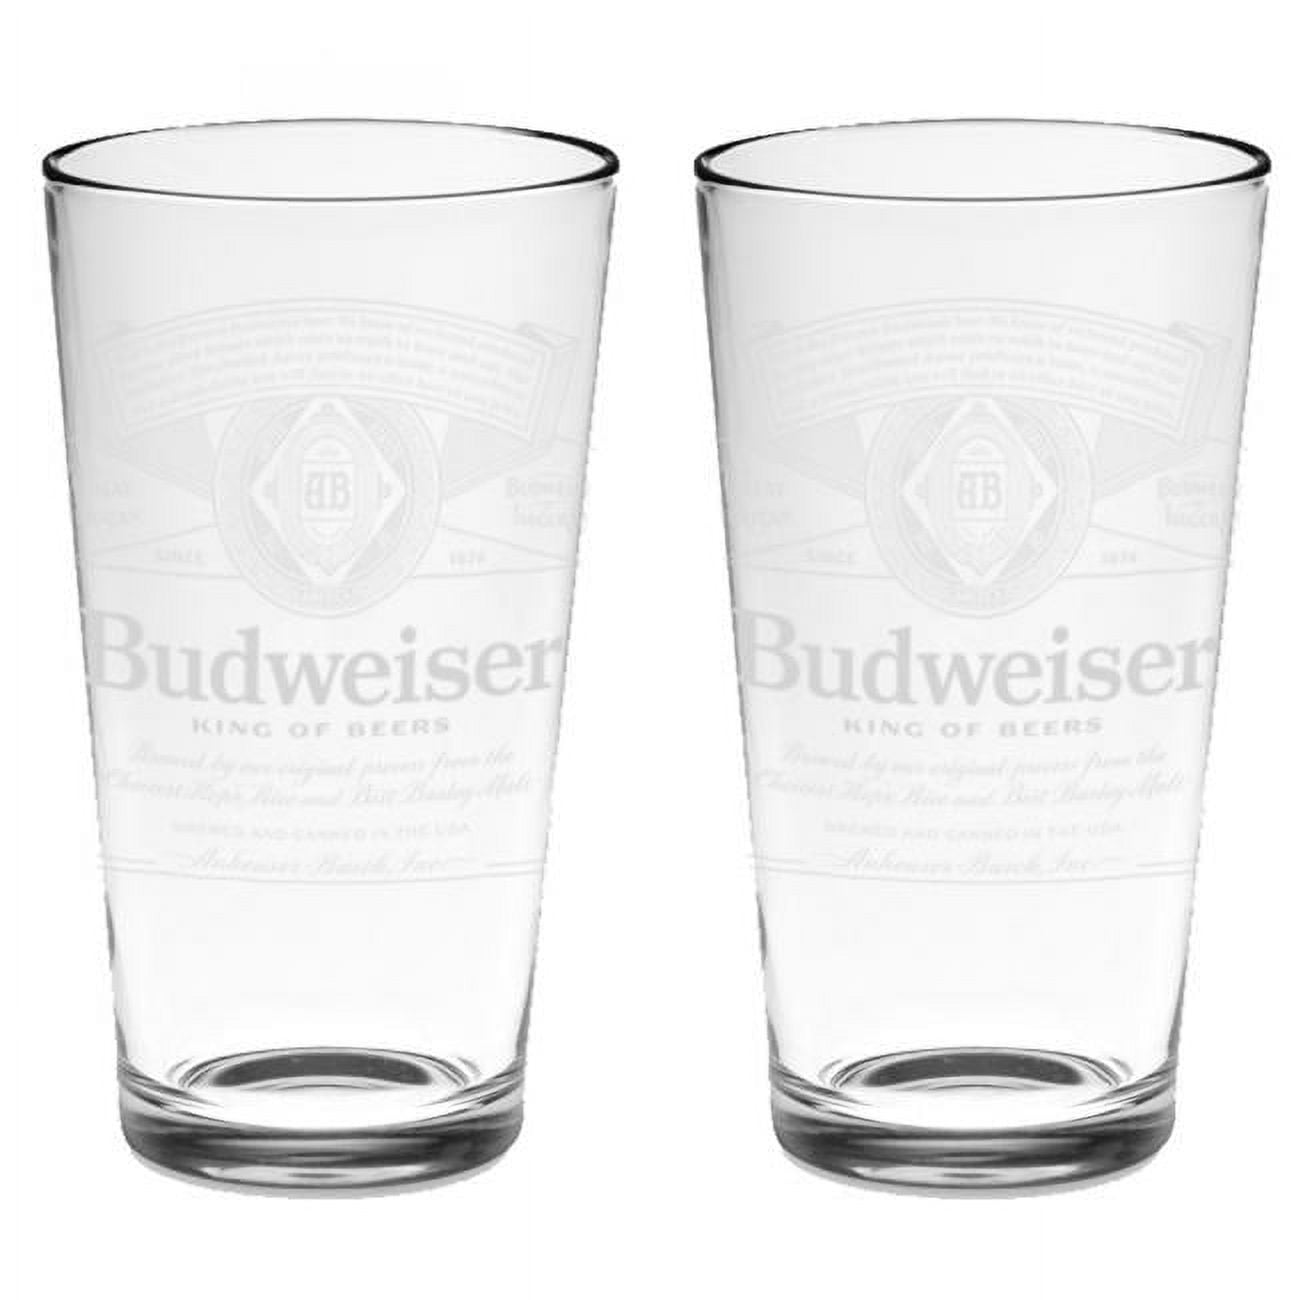 Budweiser Label Glasses Bar Ware Indiana Glass Set of 8 EUC in